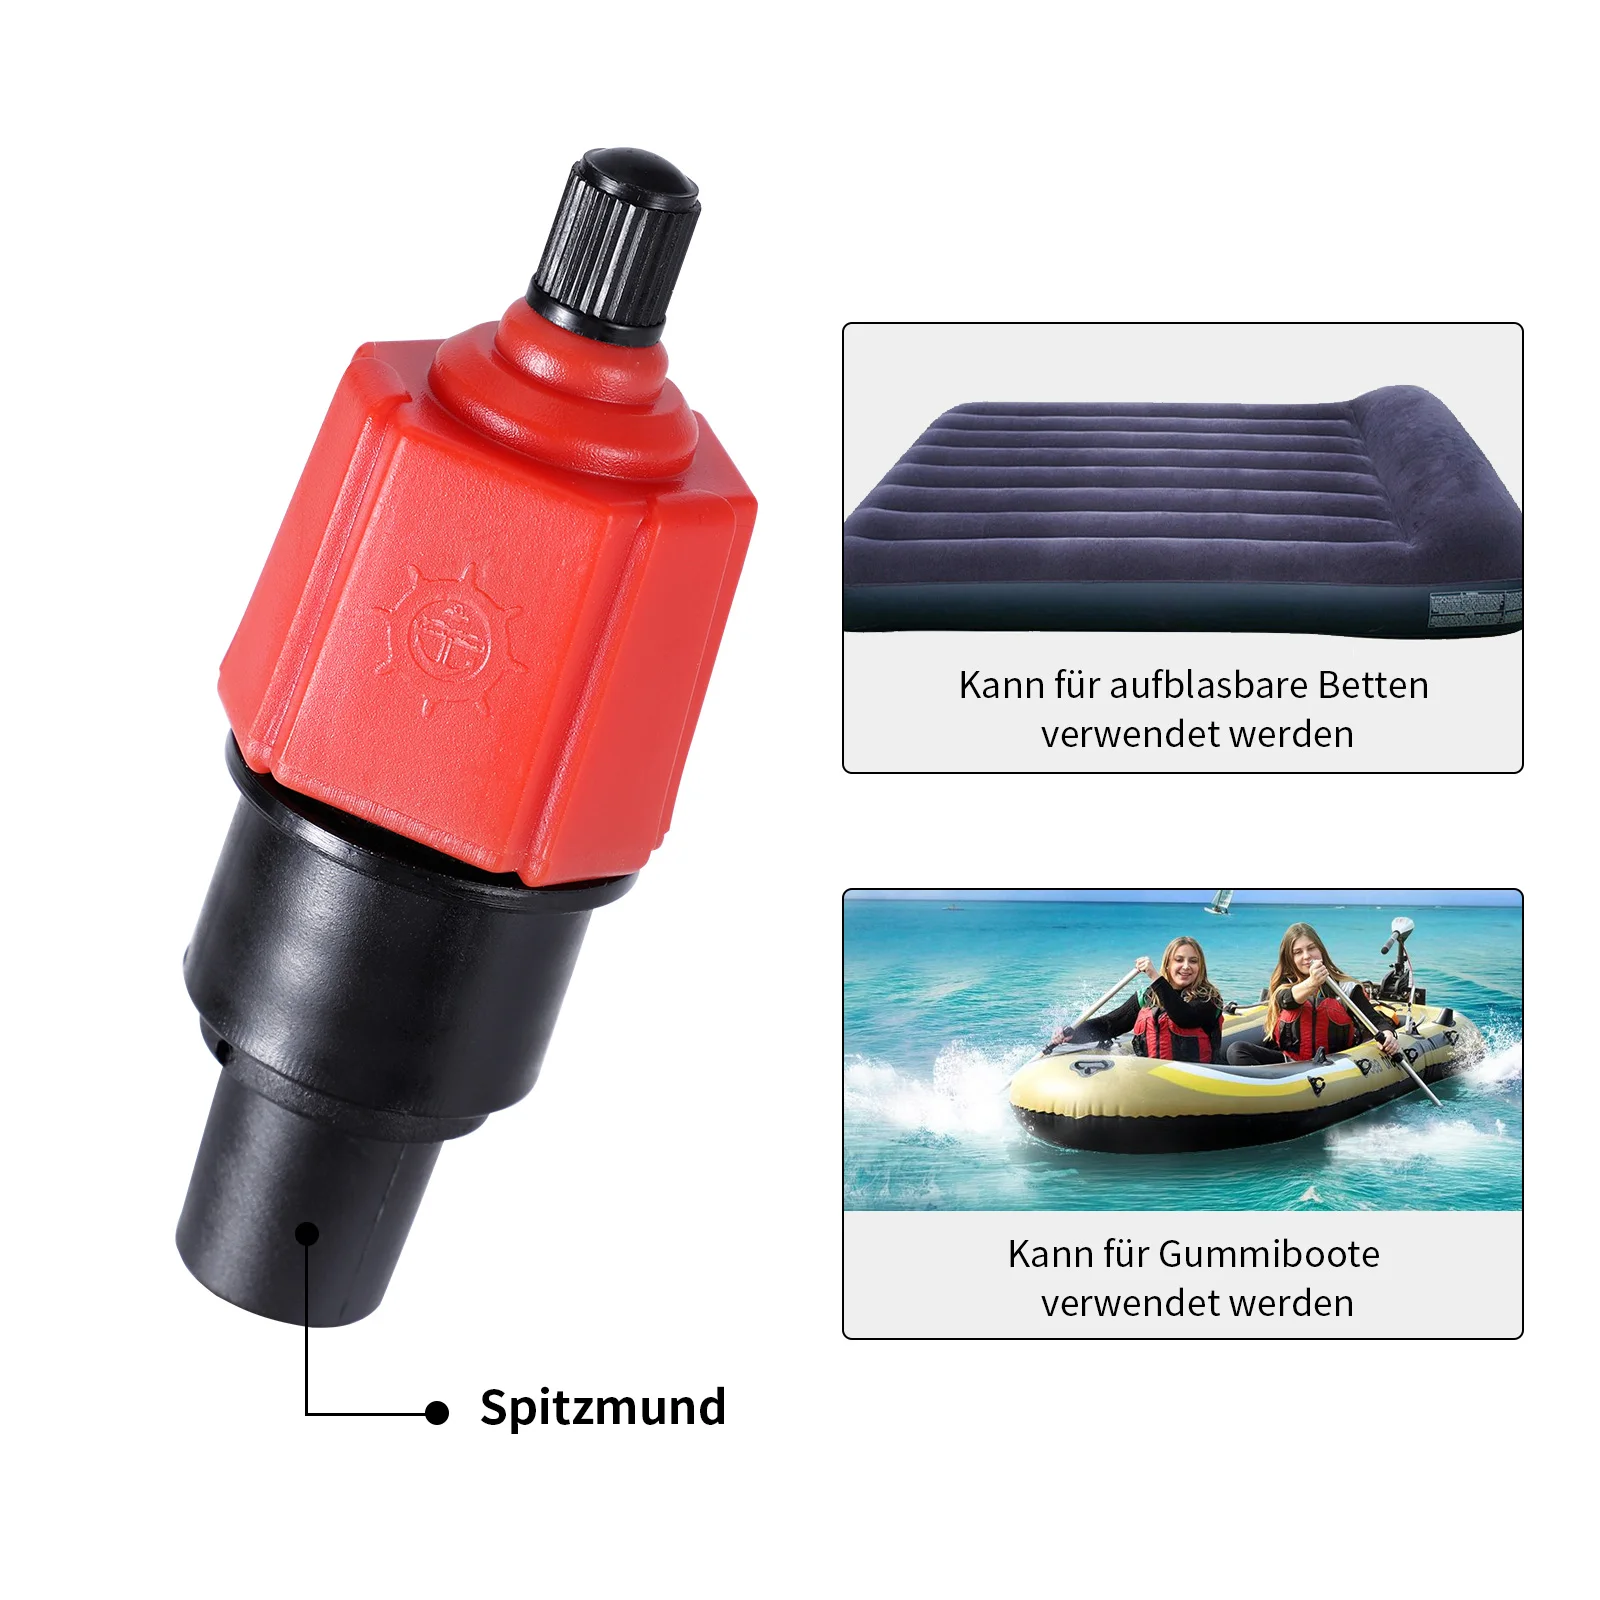 SM SunniMix Inflatable Boat Air Valve Adaptor Sup Board Stand up Paddle Board Kayak Canoe Raft Rubber Boat Fish Boat Accessory 